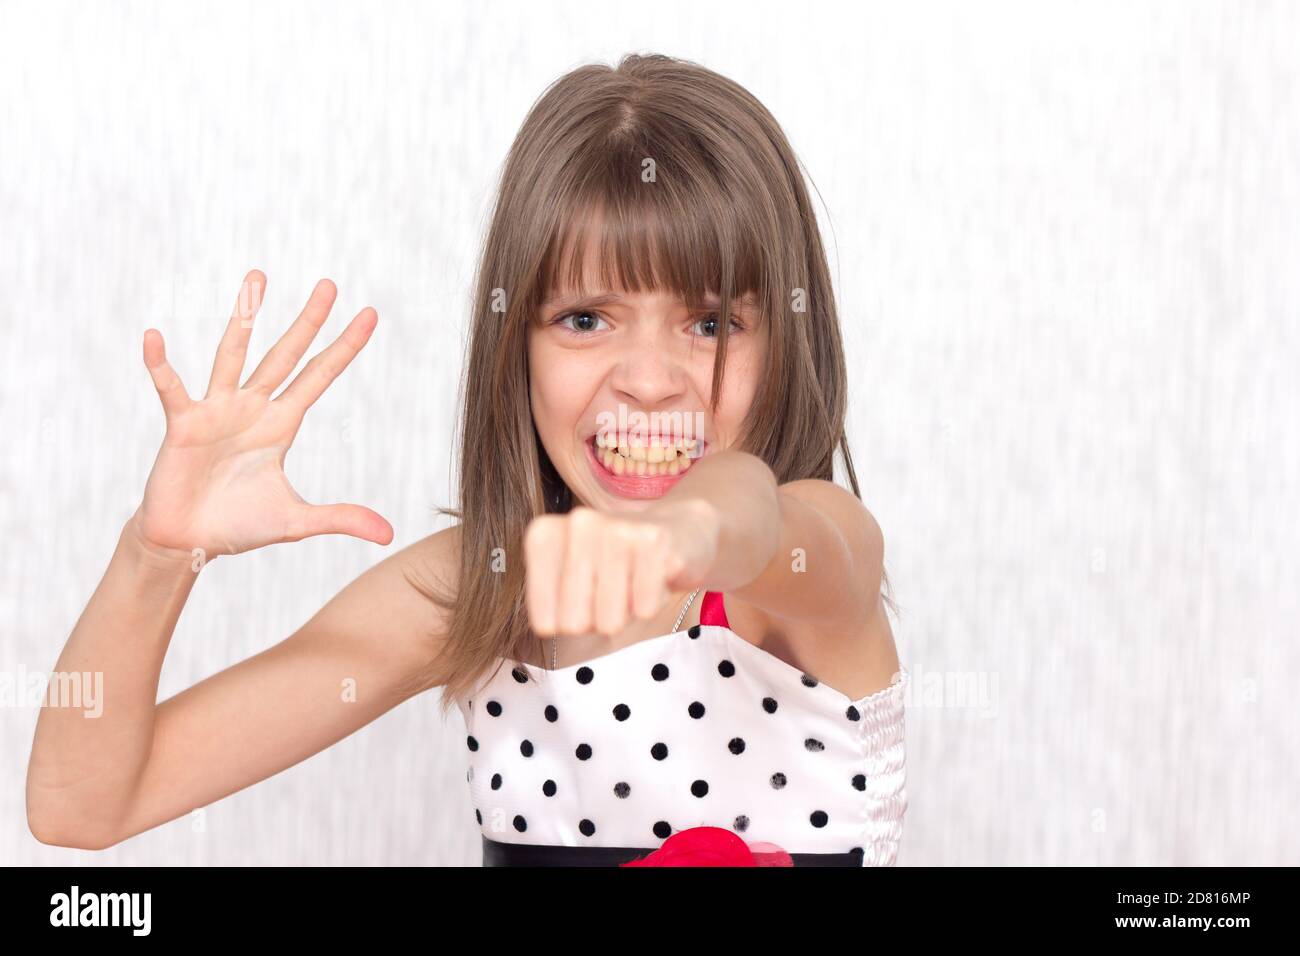 Angry Girl And Emotional Girl Clenched Her Hand Into A Fist Isolated On White Background Stock